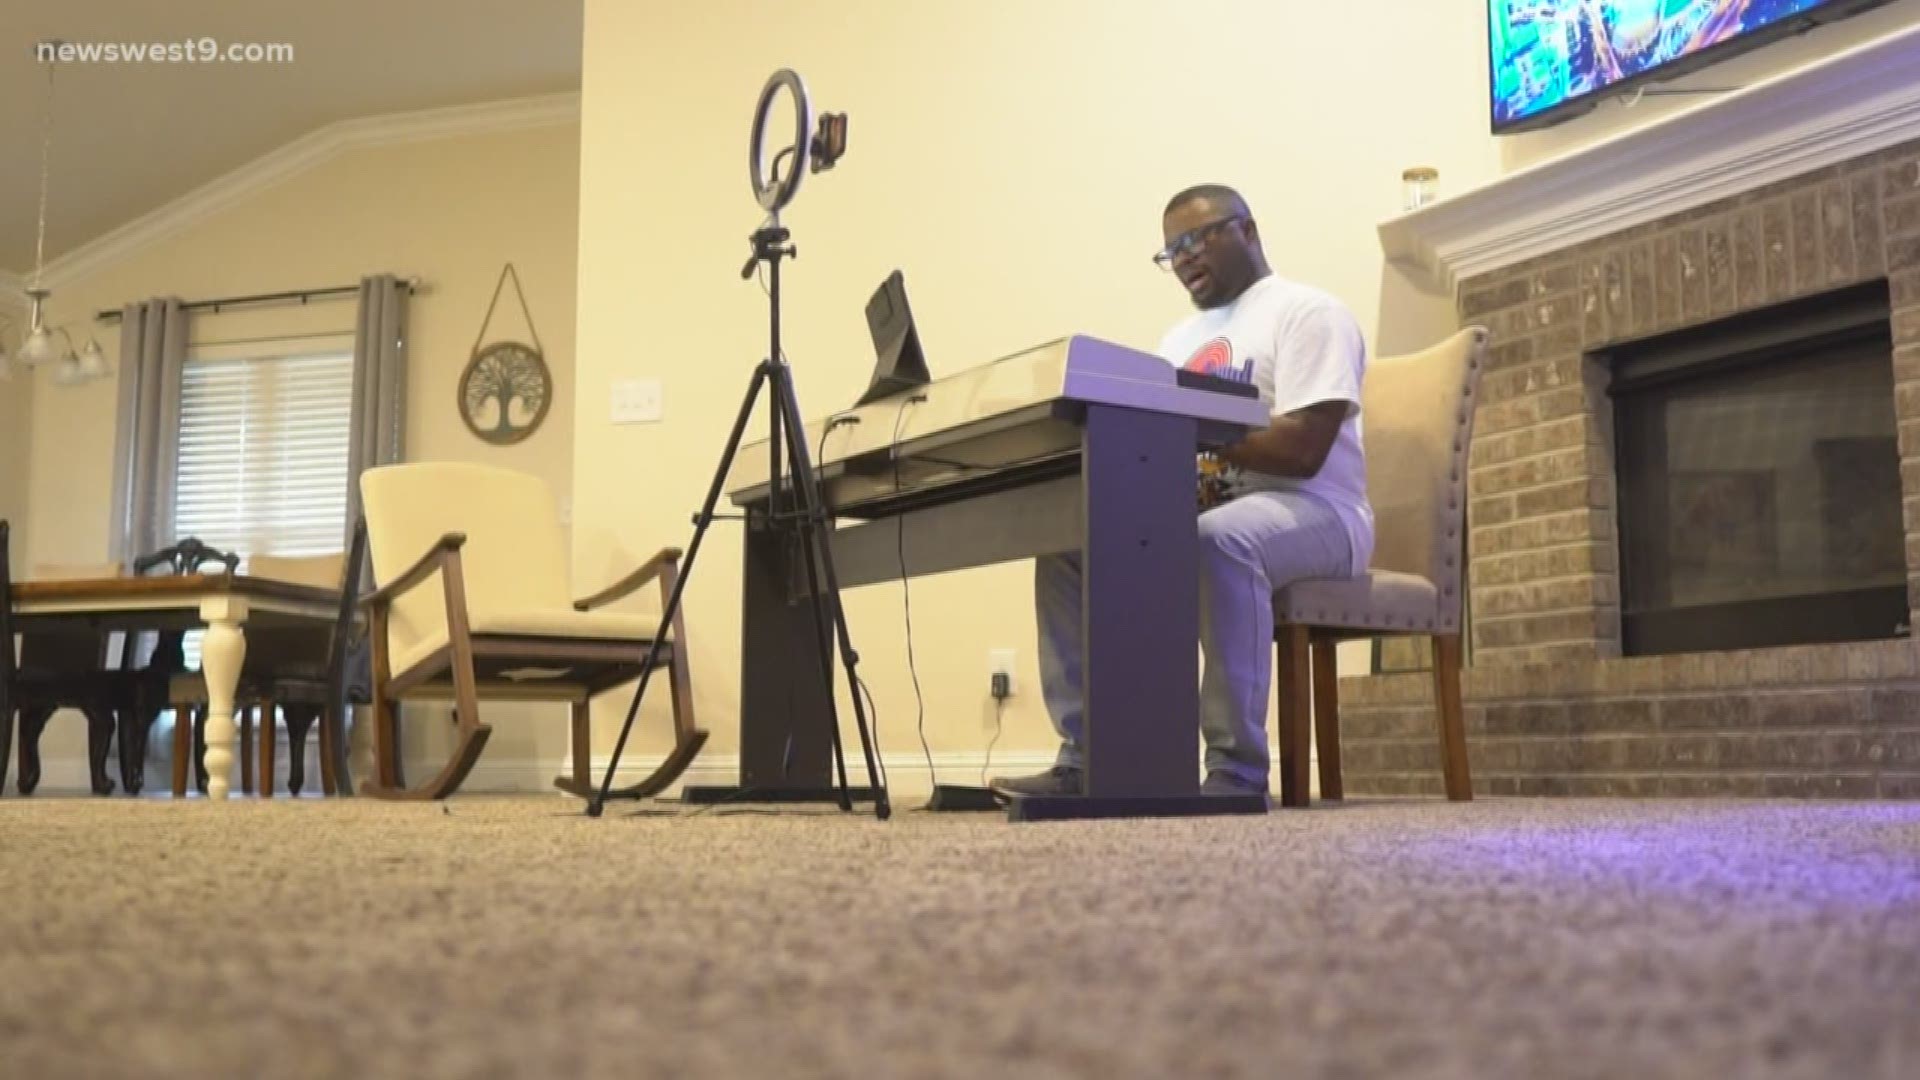 Albert Hall, Youth Minister at First Baptist Church in Stanton, uses his voice to reach hearts across social media platforms.